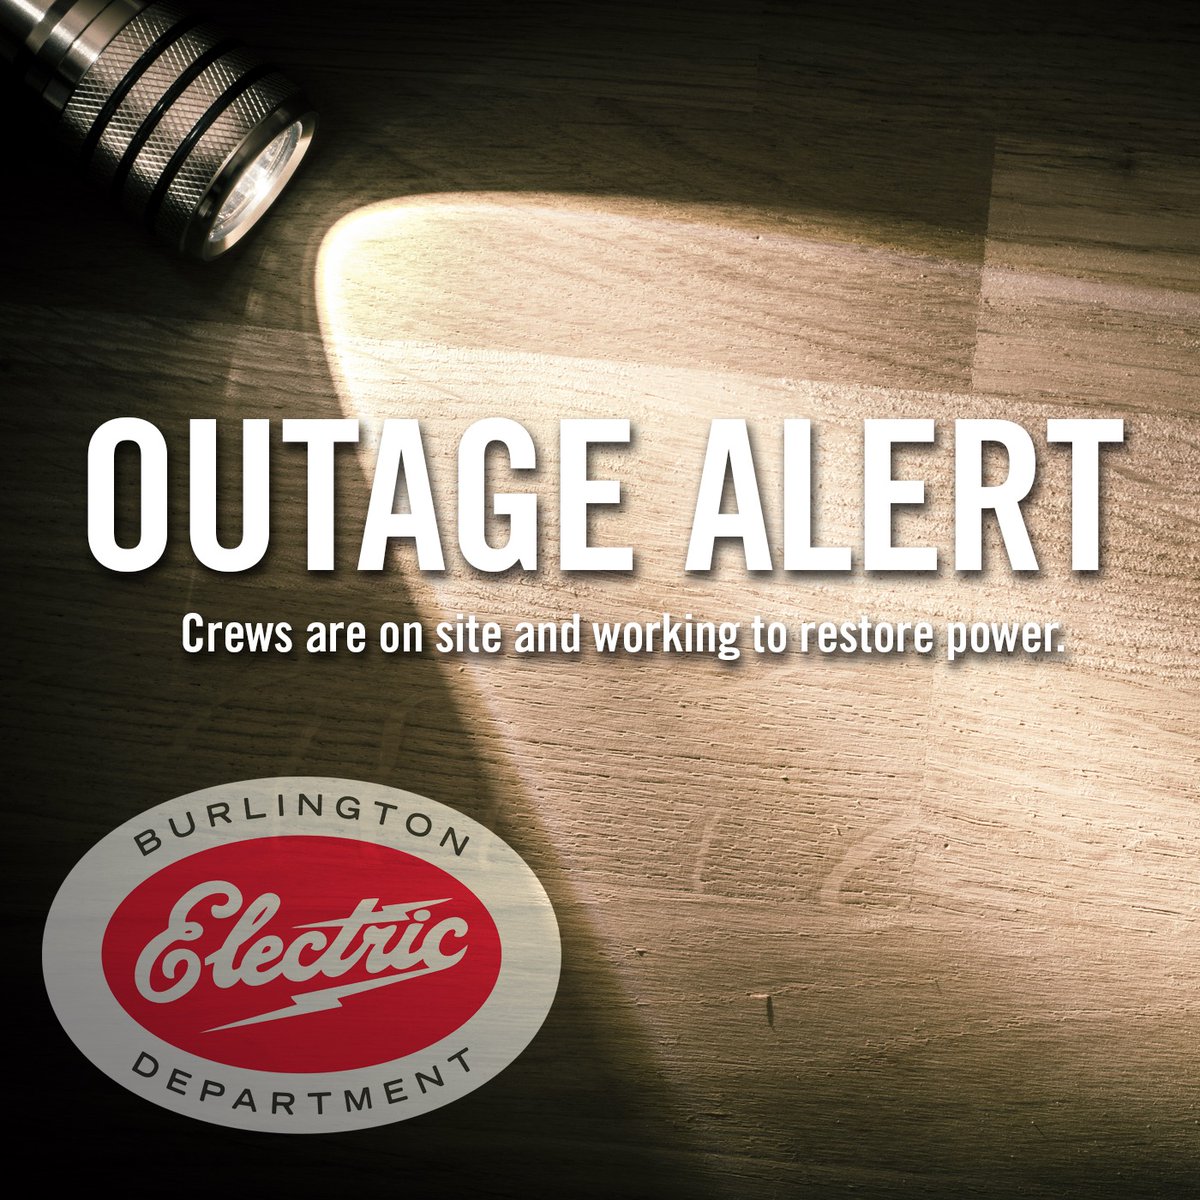 We are aware of a large outage in the Old North End and Waterfront in #btv . Our crews are hard at work. Updates as they come in. Thank you for your patience and we apologize for the inconvenience. #burlingtonvt